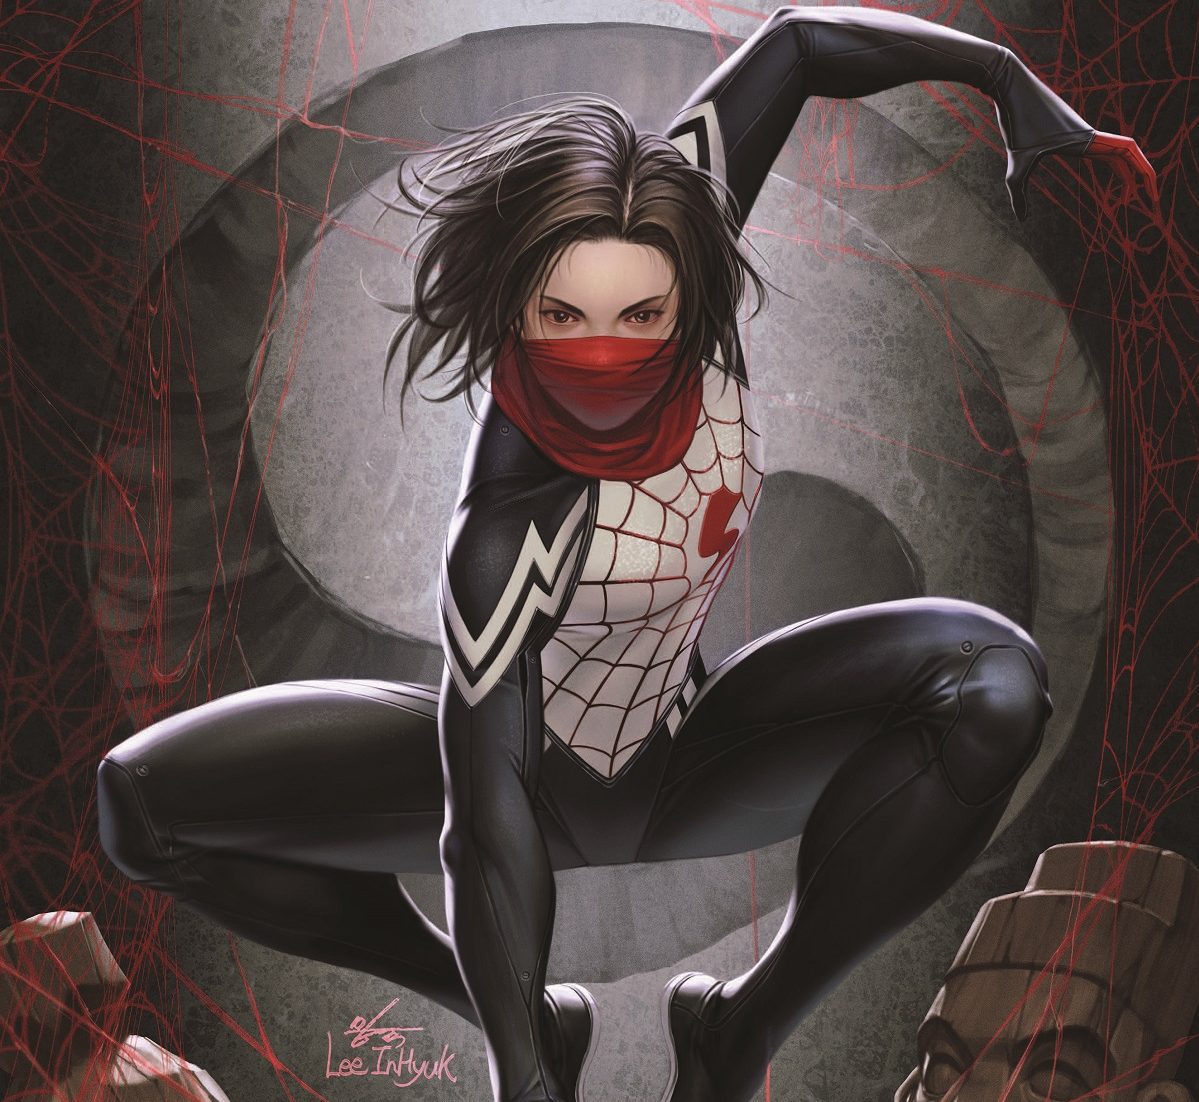 Silk Vol. 2: Age of the Witch